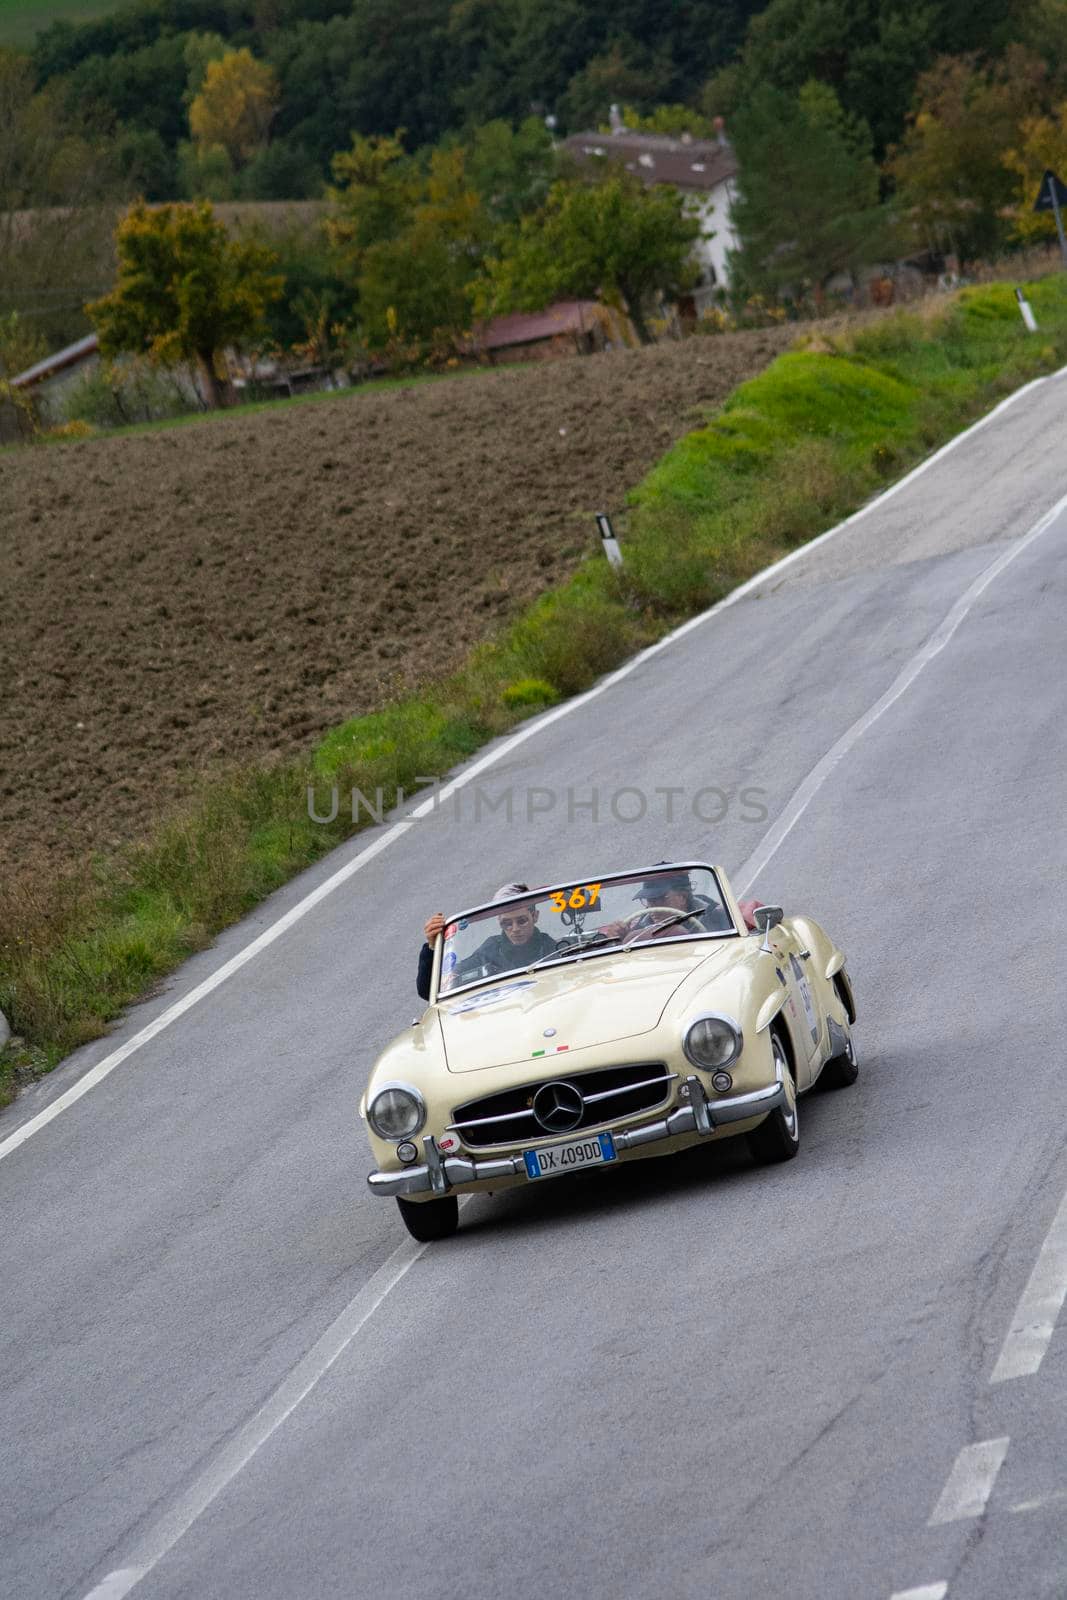 MERCEDES-BENZ 190 SL 1956 on an old racing car in rally Mille Miglia 2020 the famous italian historical race (1927-1957 by massimocampanari